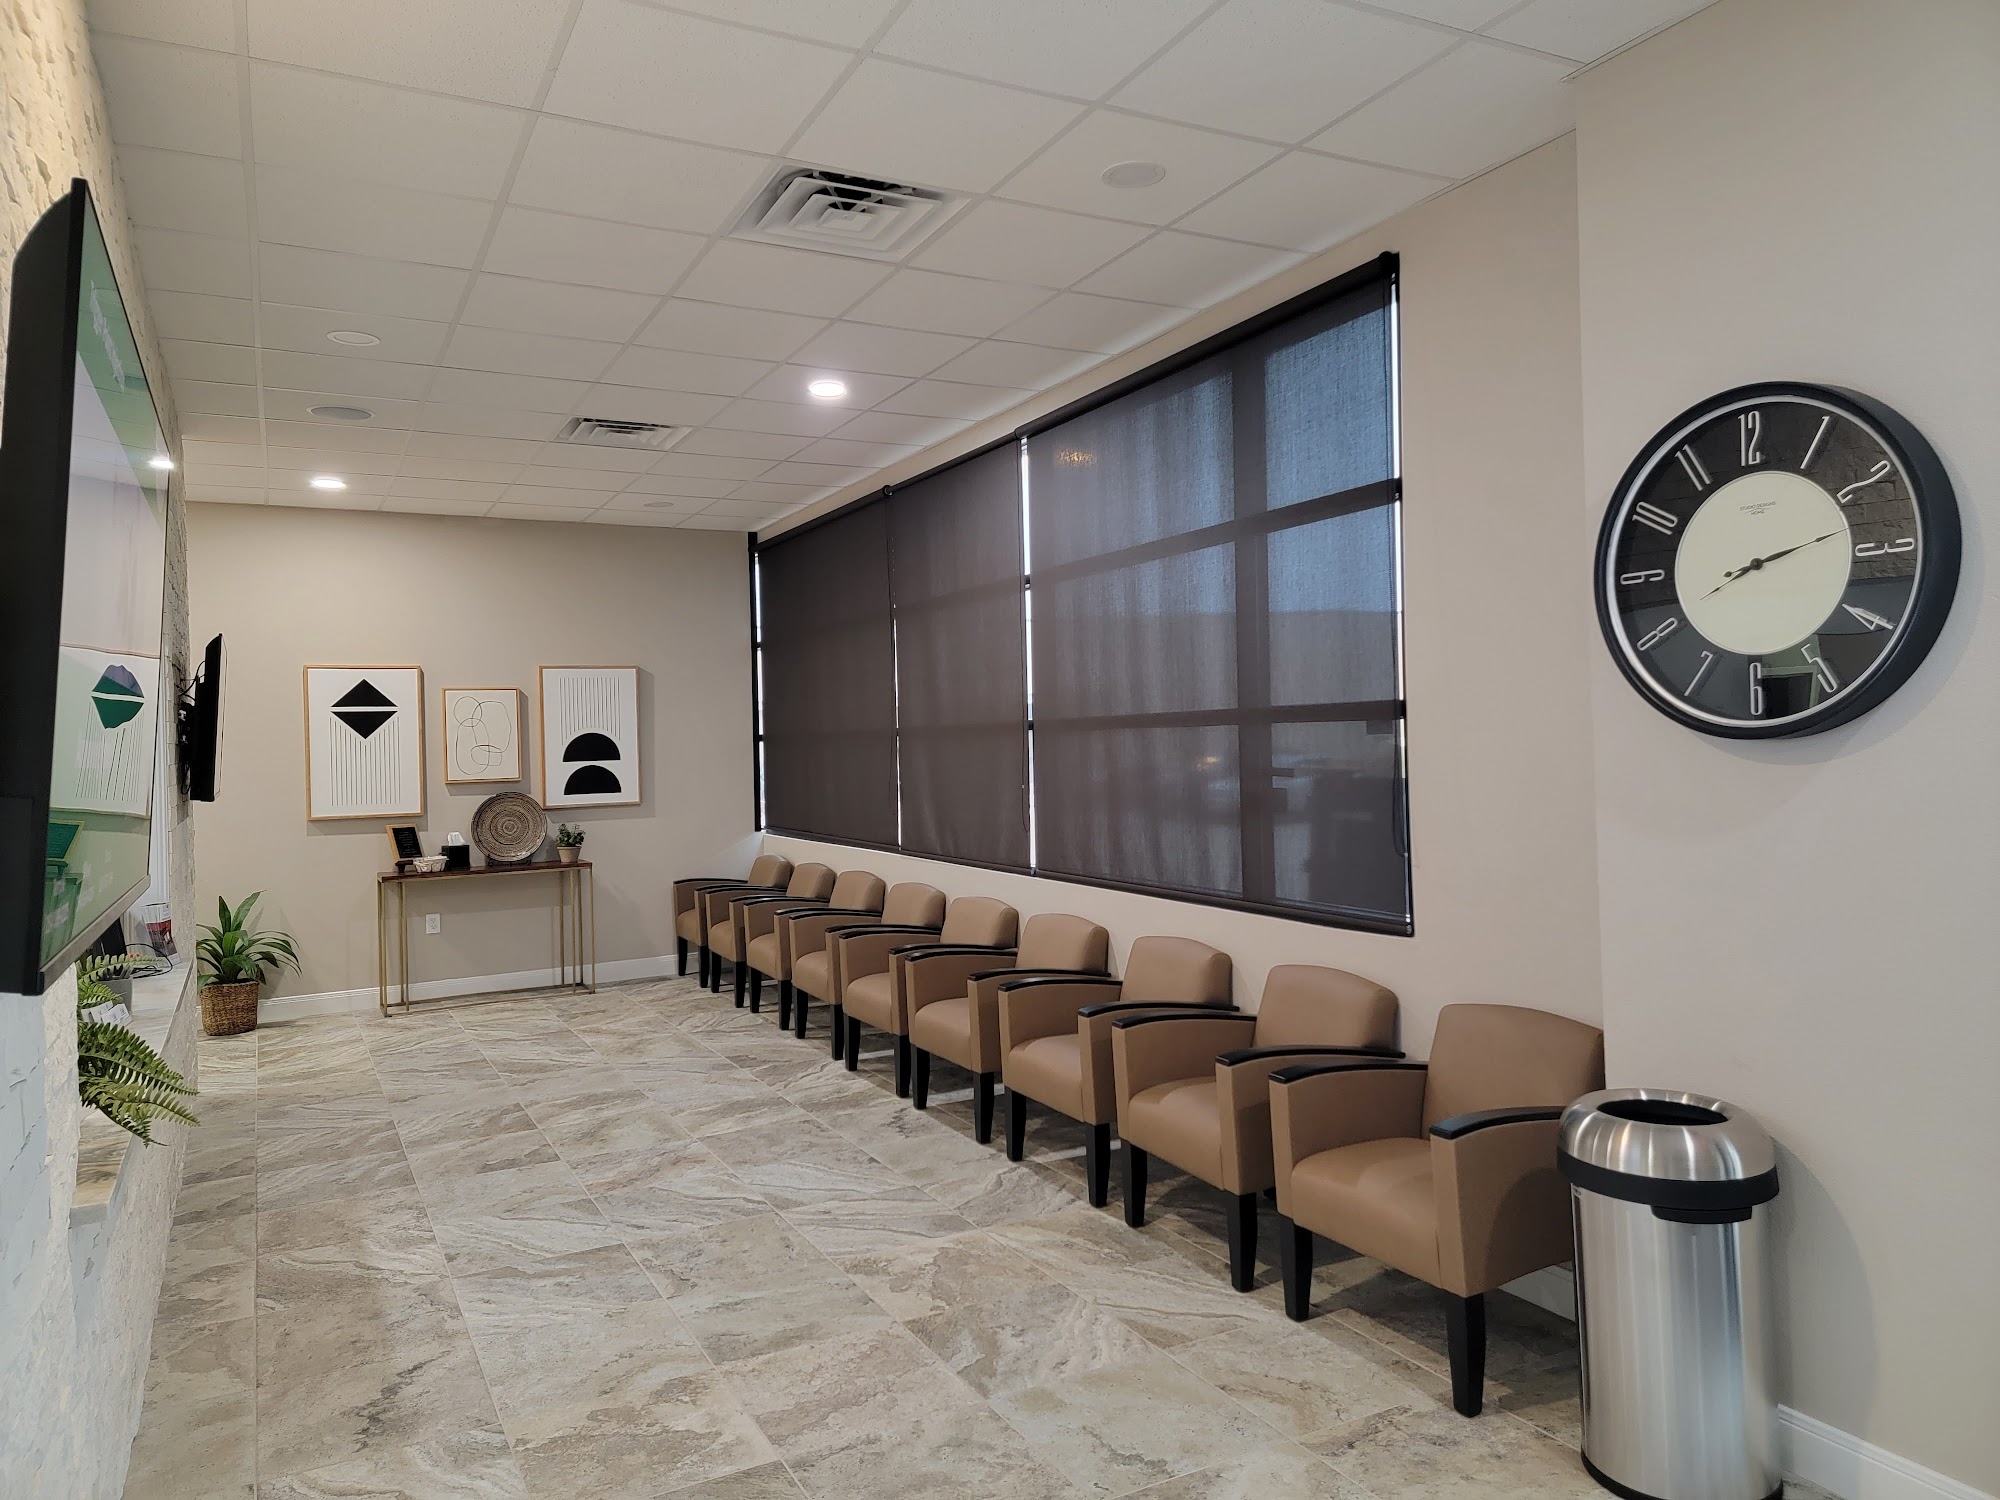 Anthony Medical & Chiropractic Center - Waco